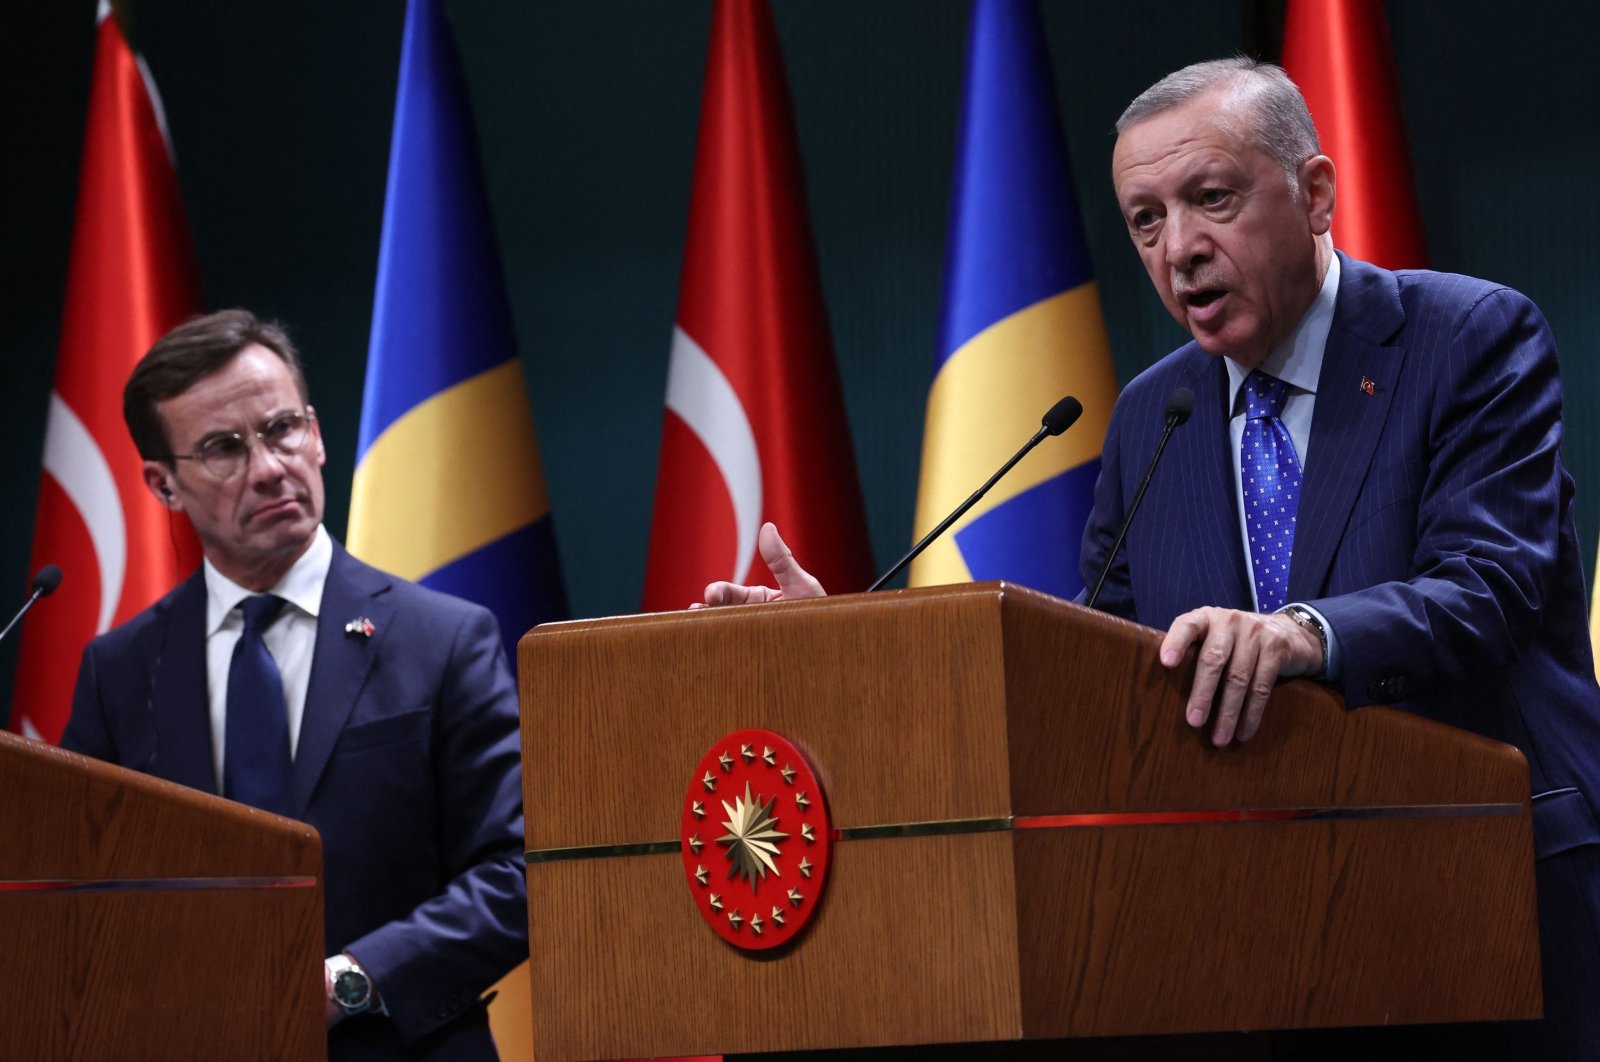 President Recep Tayyip Erdoğan and Swedish Prime Minister Ulf Kristersson (L) hold a press conference following their meeting at the Presidential Palace in the capital Ankara, Türkiye, Nov. 8, 2022. (AFP File Photo)